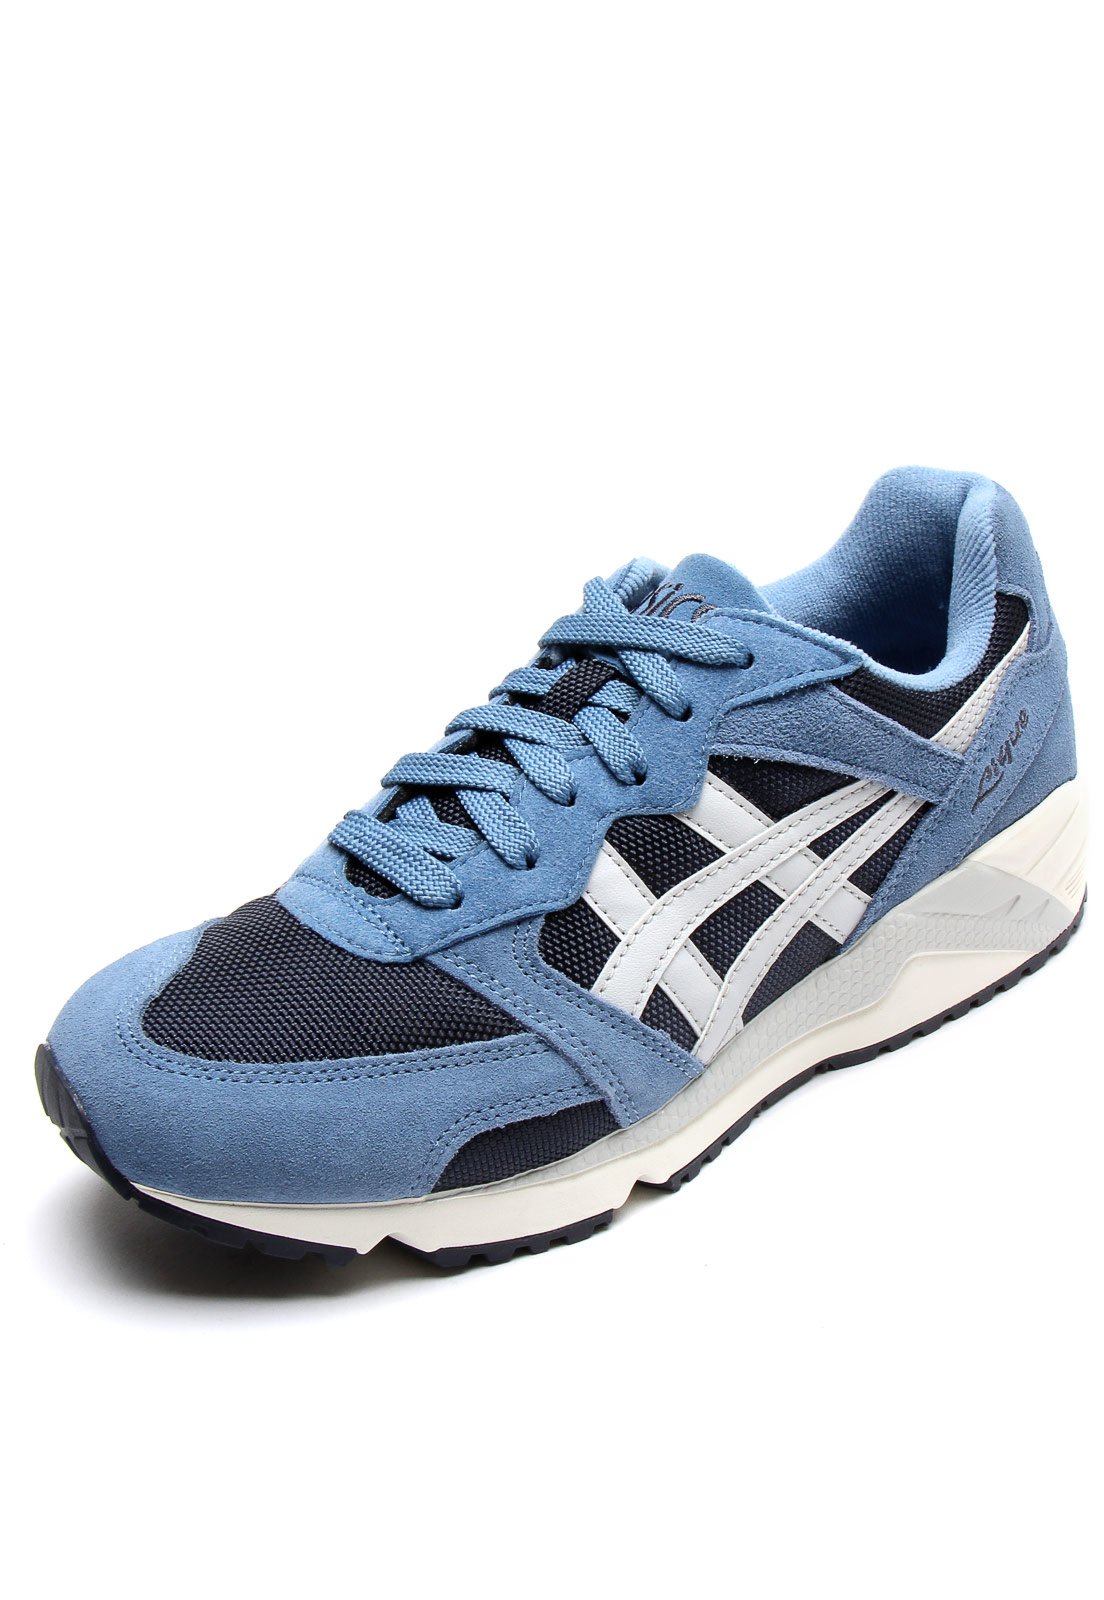 tênis couro asics top spin suede